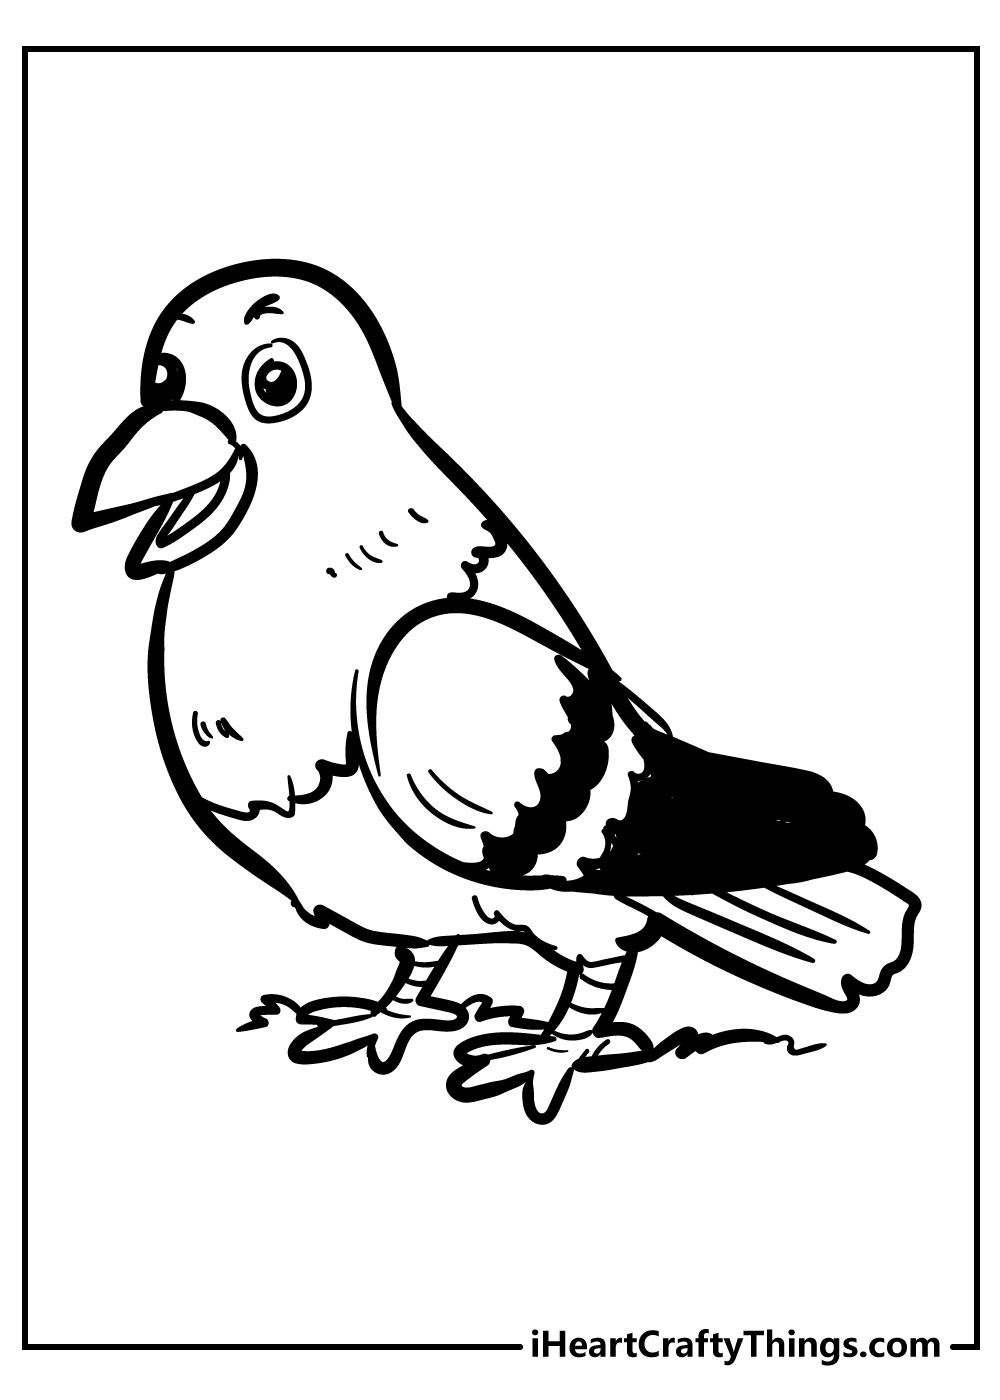 Bird coloring sheet for children free download